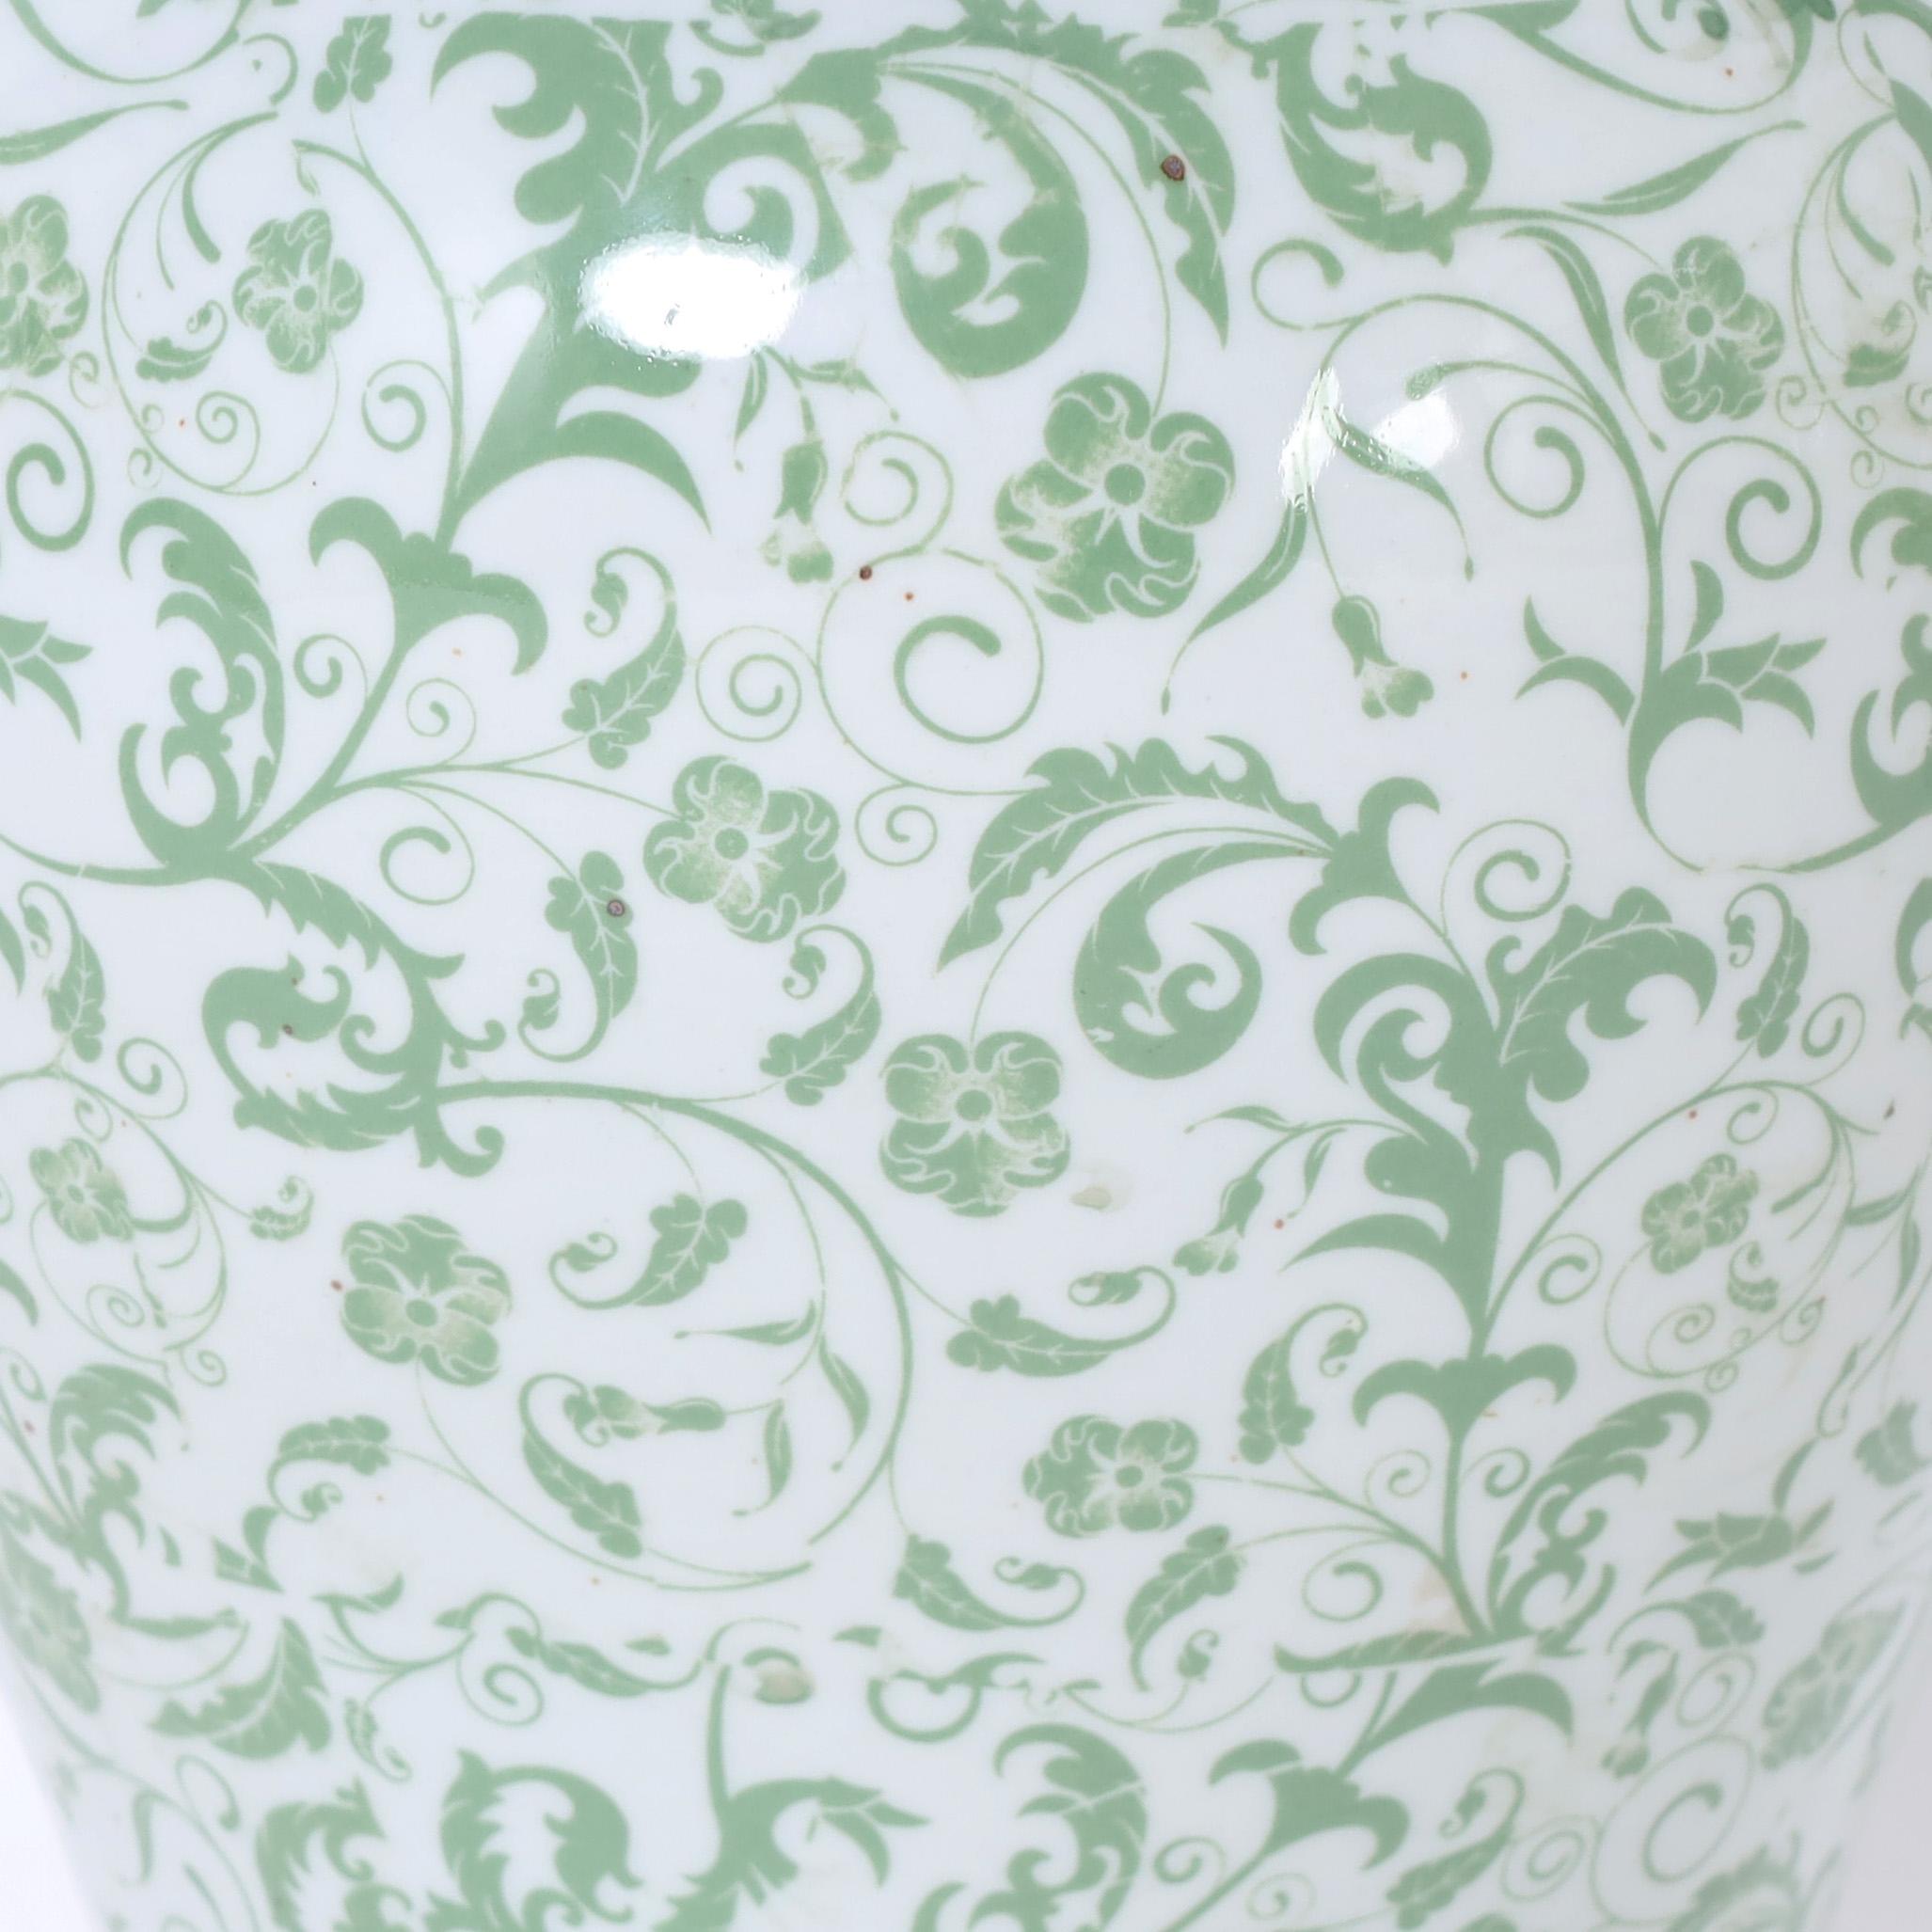 Contemporary Pair of Chinese Green and White Porcelain Lidded Jars